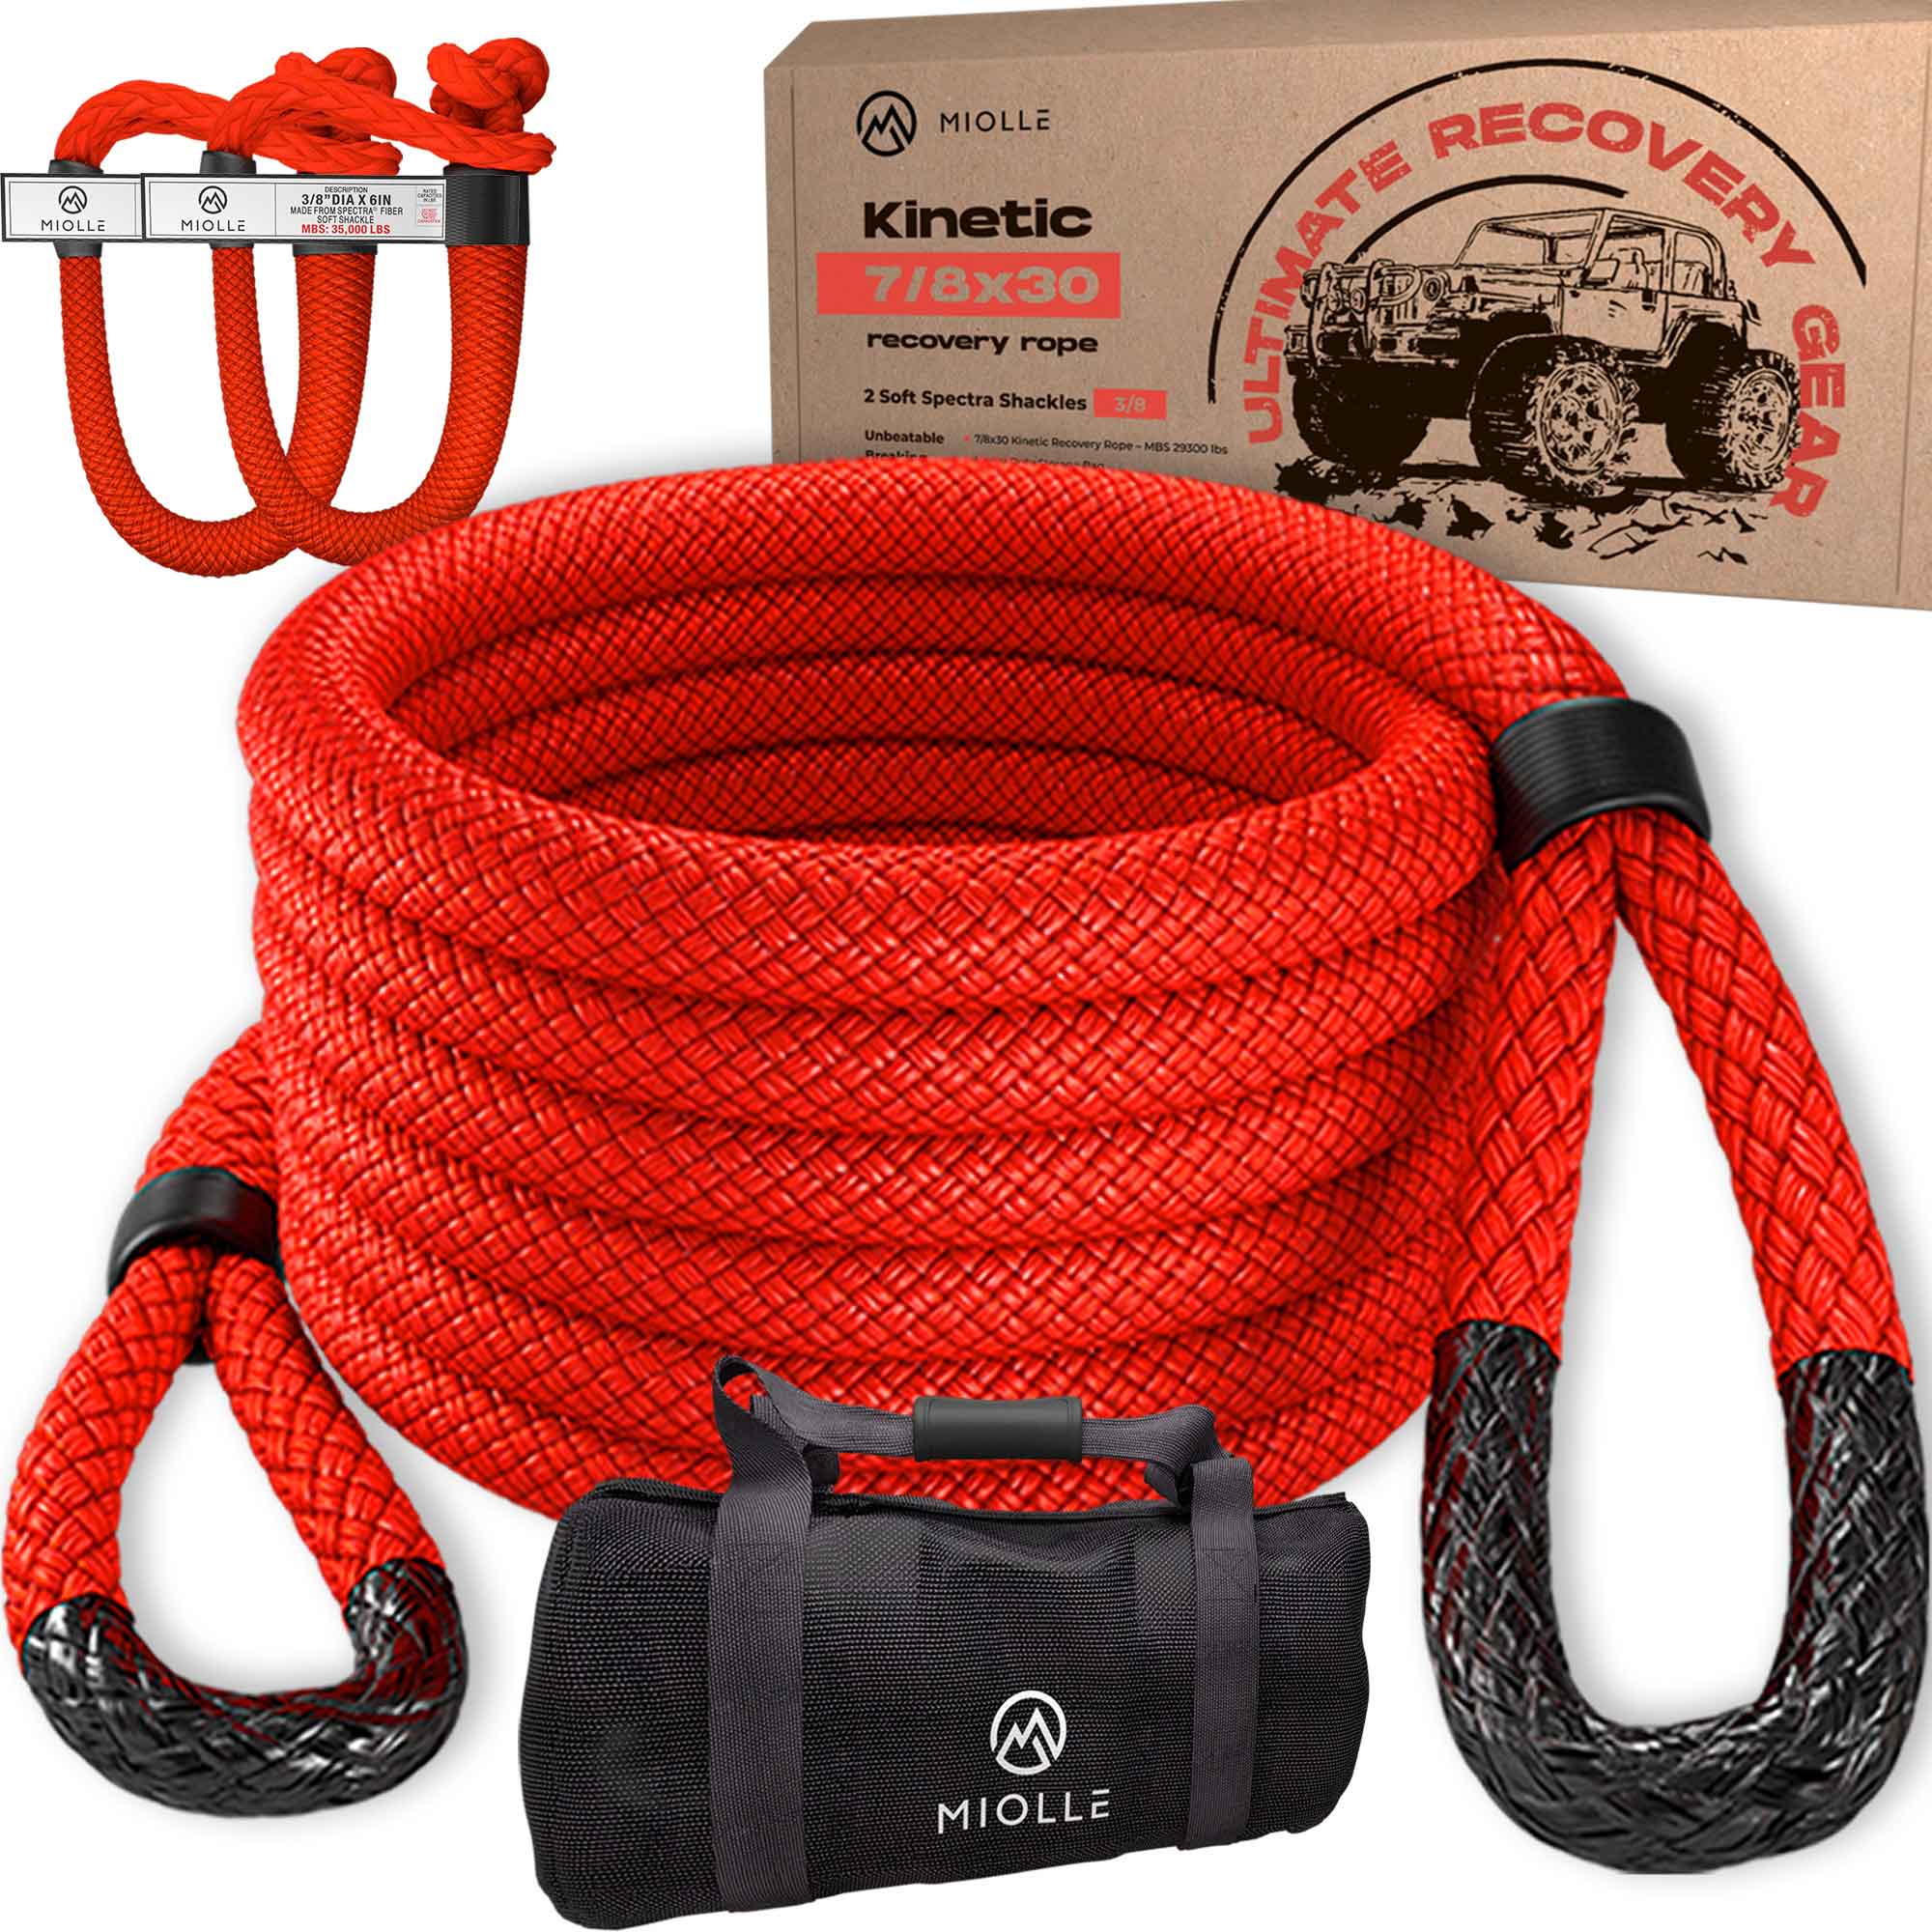 Kinetic Recovery Rope - Miolle 7/8x30' Red (29,300 lbs), with 2 Spect